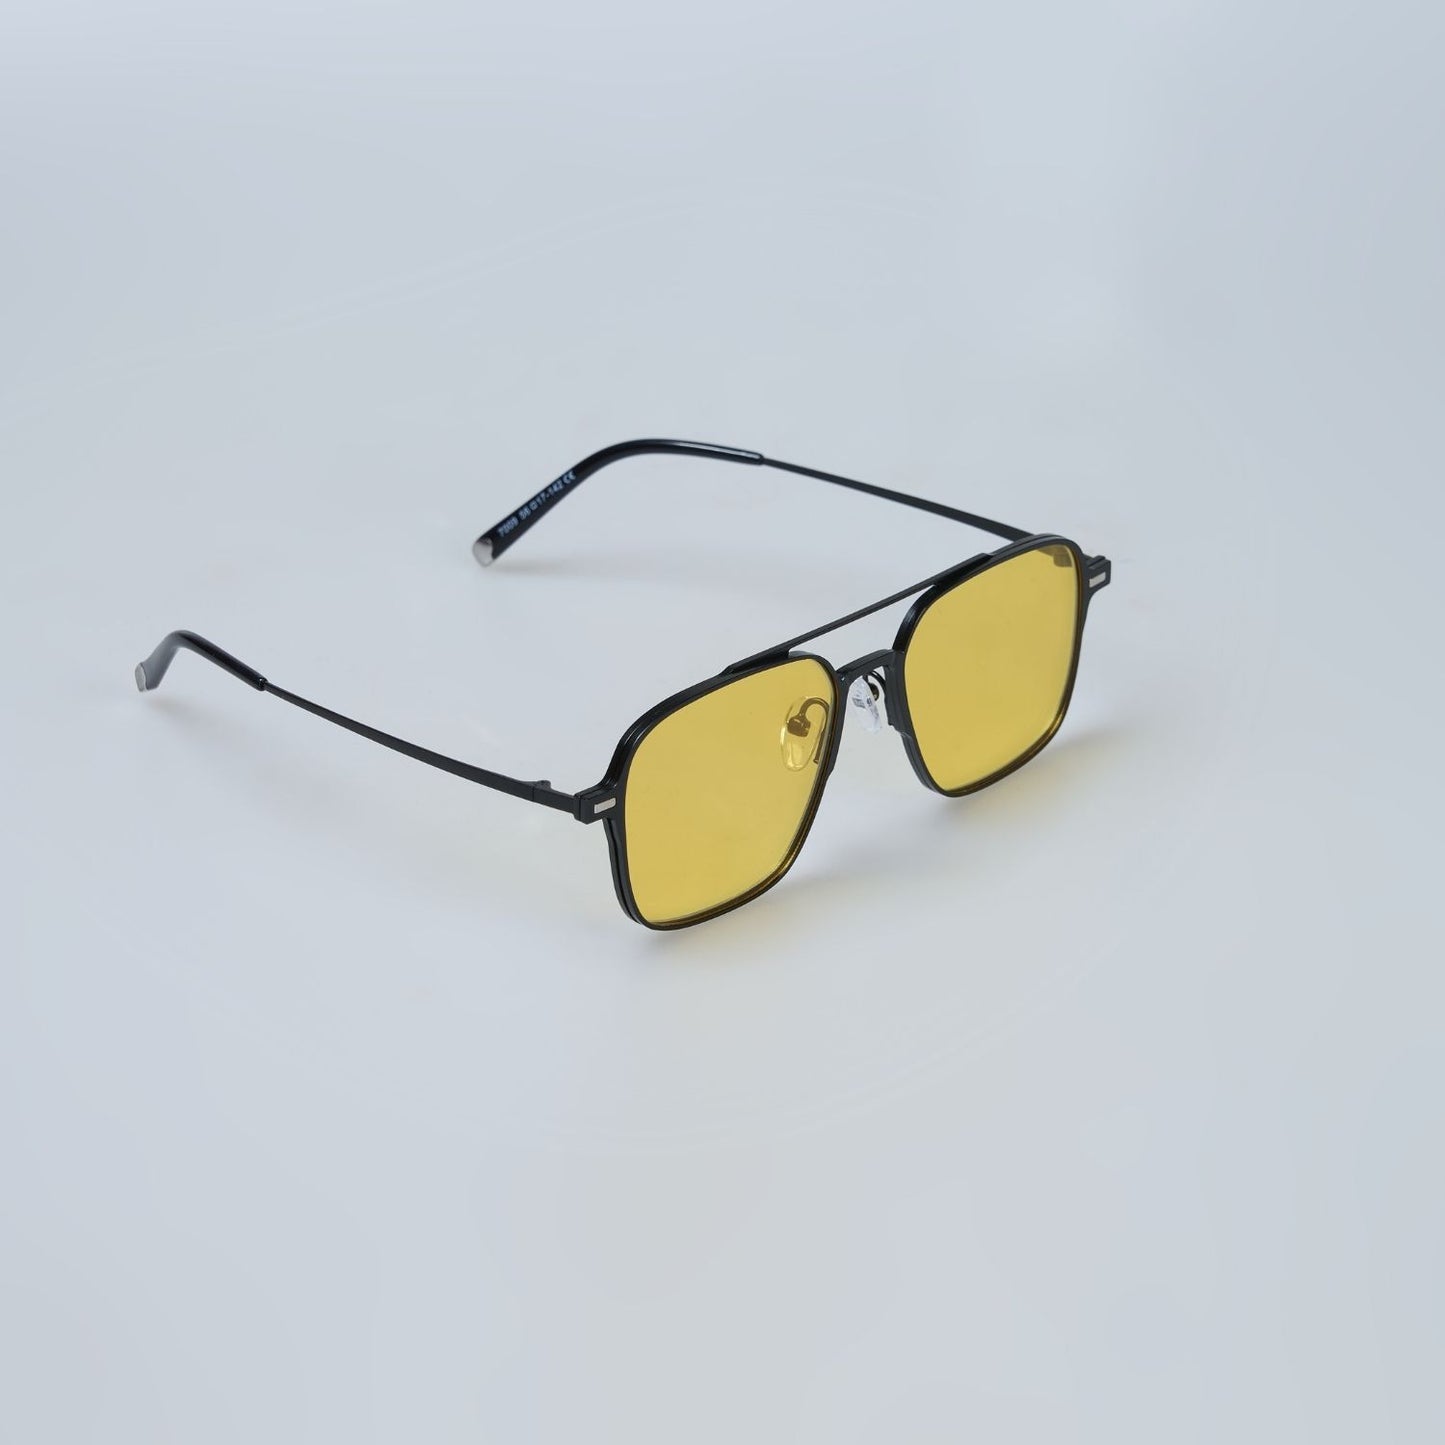 outdoor dark yellow film eyeshade with detachable clips for men and women.